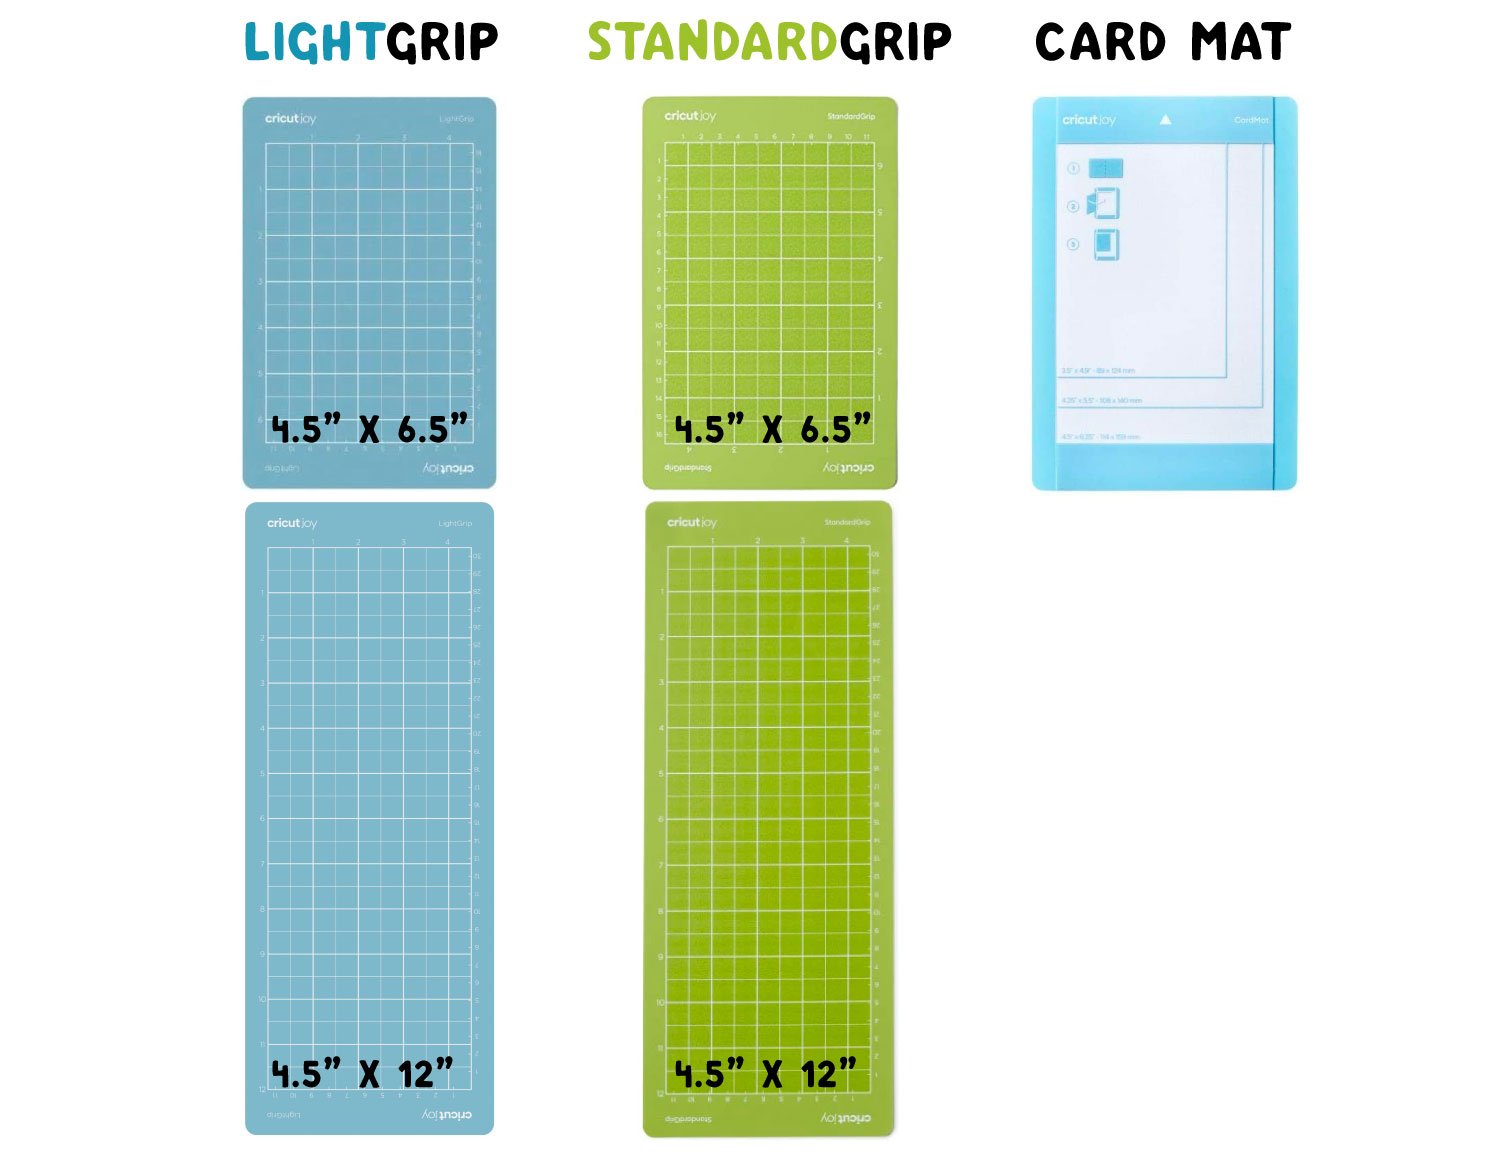 The Ultimate Guide to Cricut Mats for Better Cutting - Hey, Let's